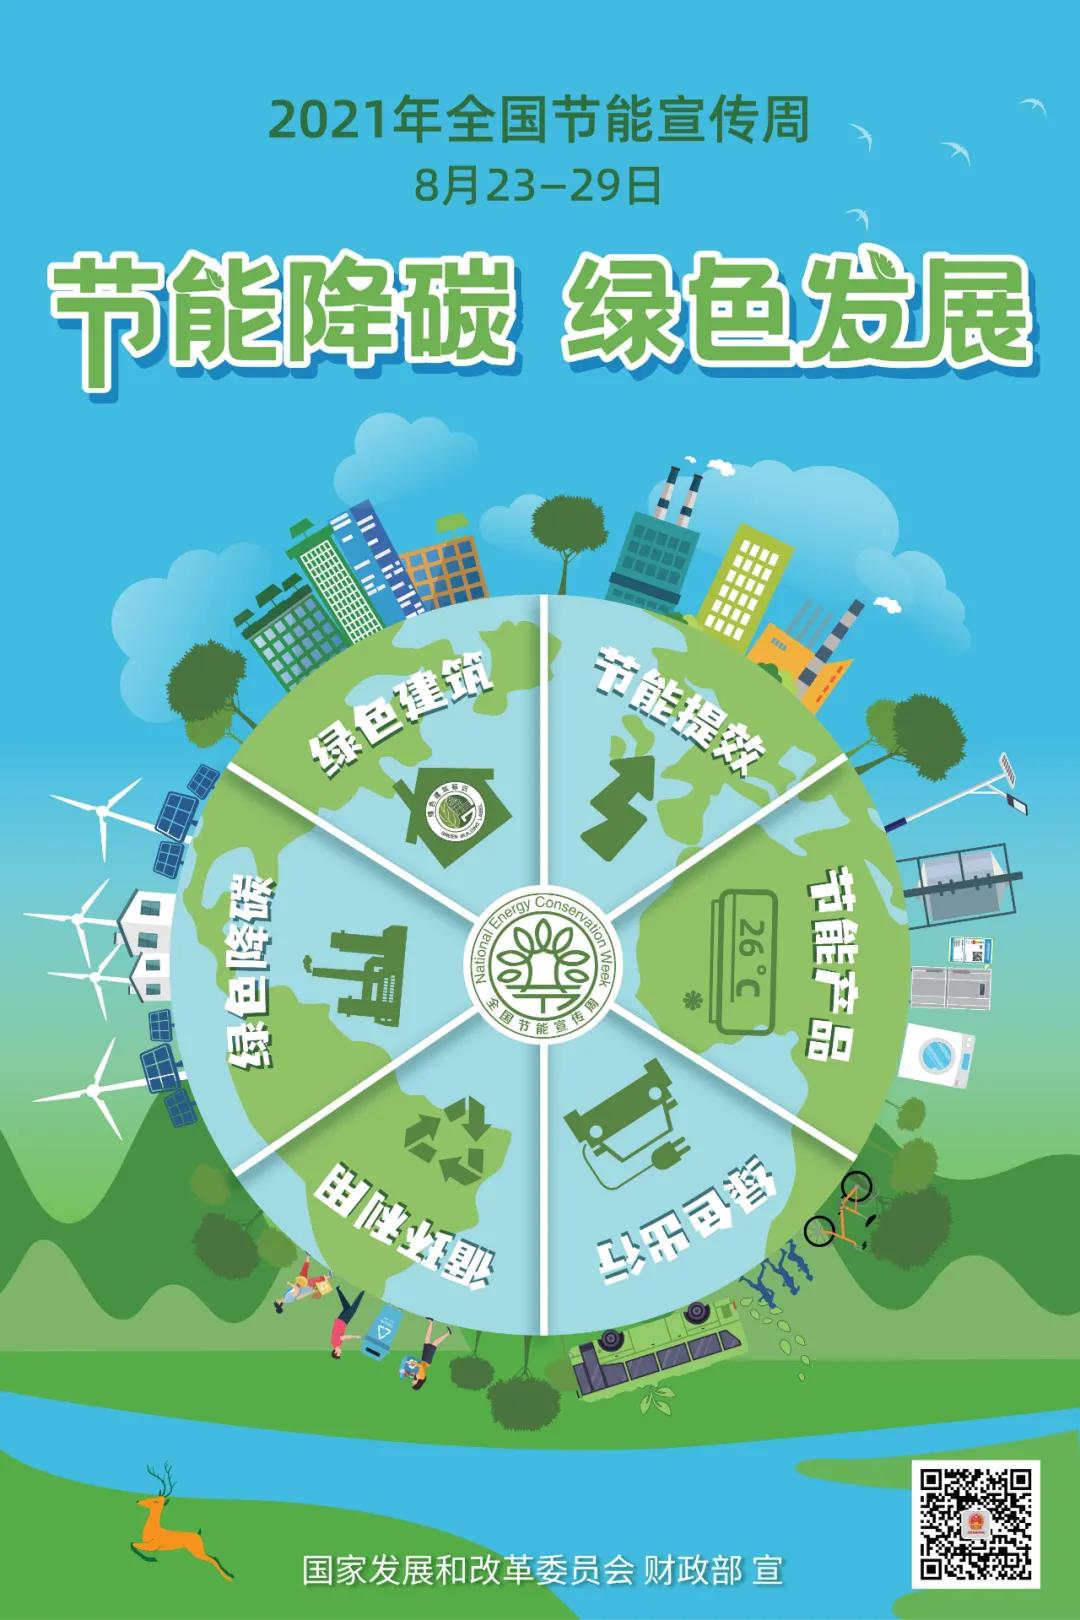 National Energy Conservation Promotion Week launched